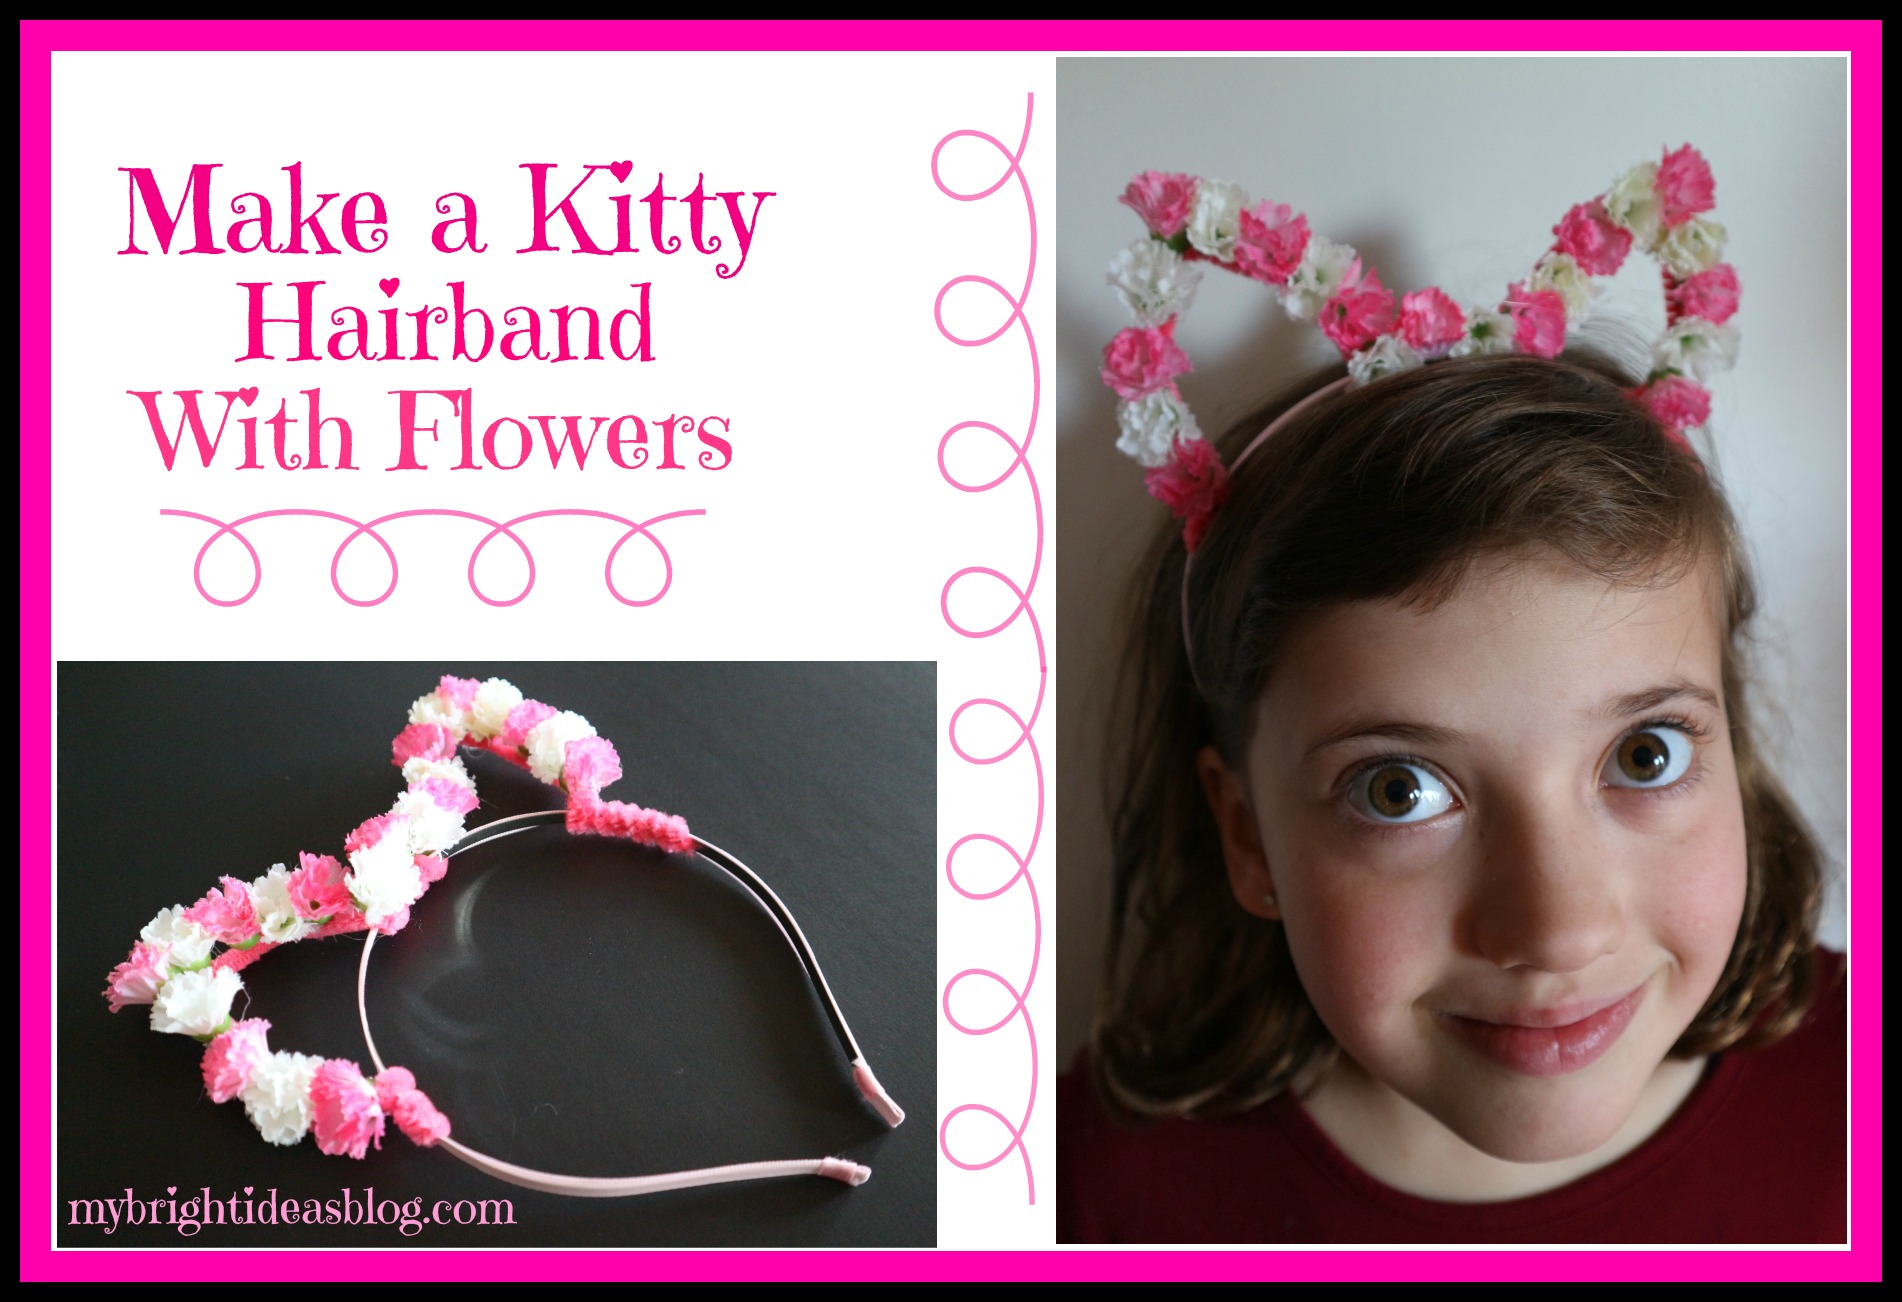 Fun, Easy and Cheap project your daughter will love! How to Make a Kitty Ear Hairband mybrightideasblog.com